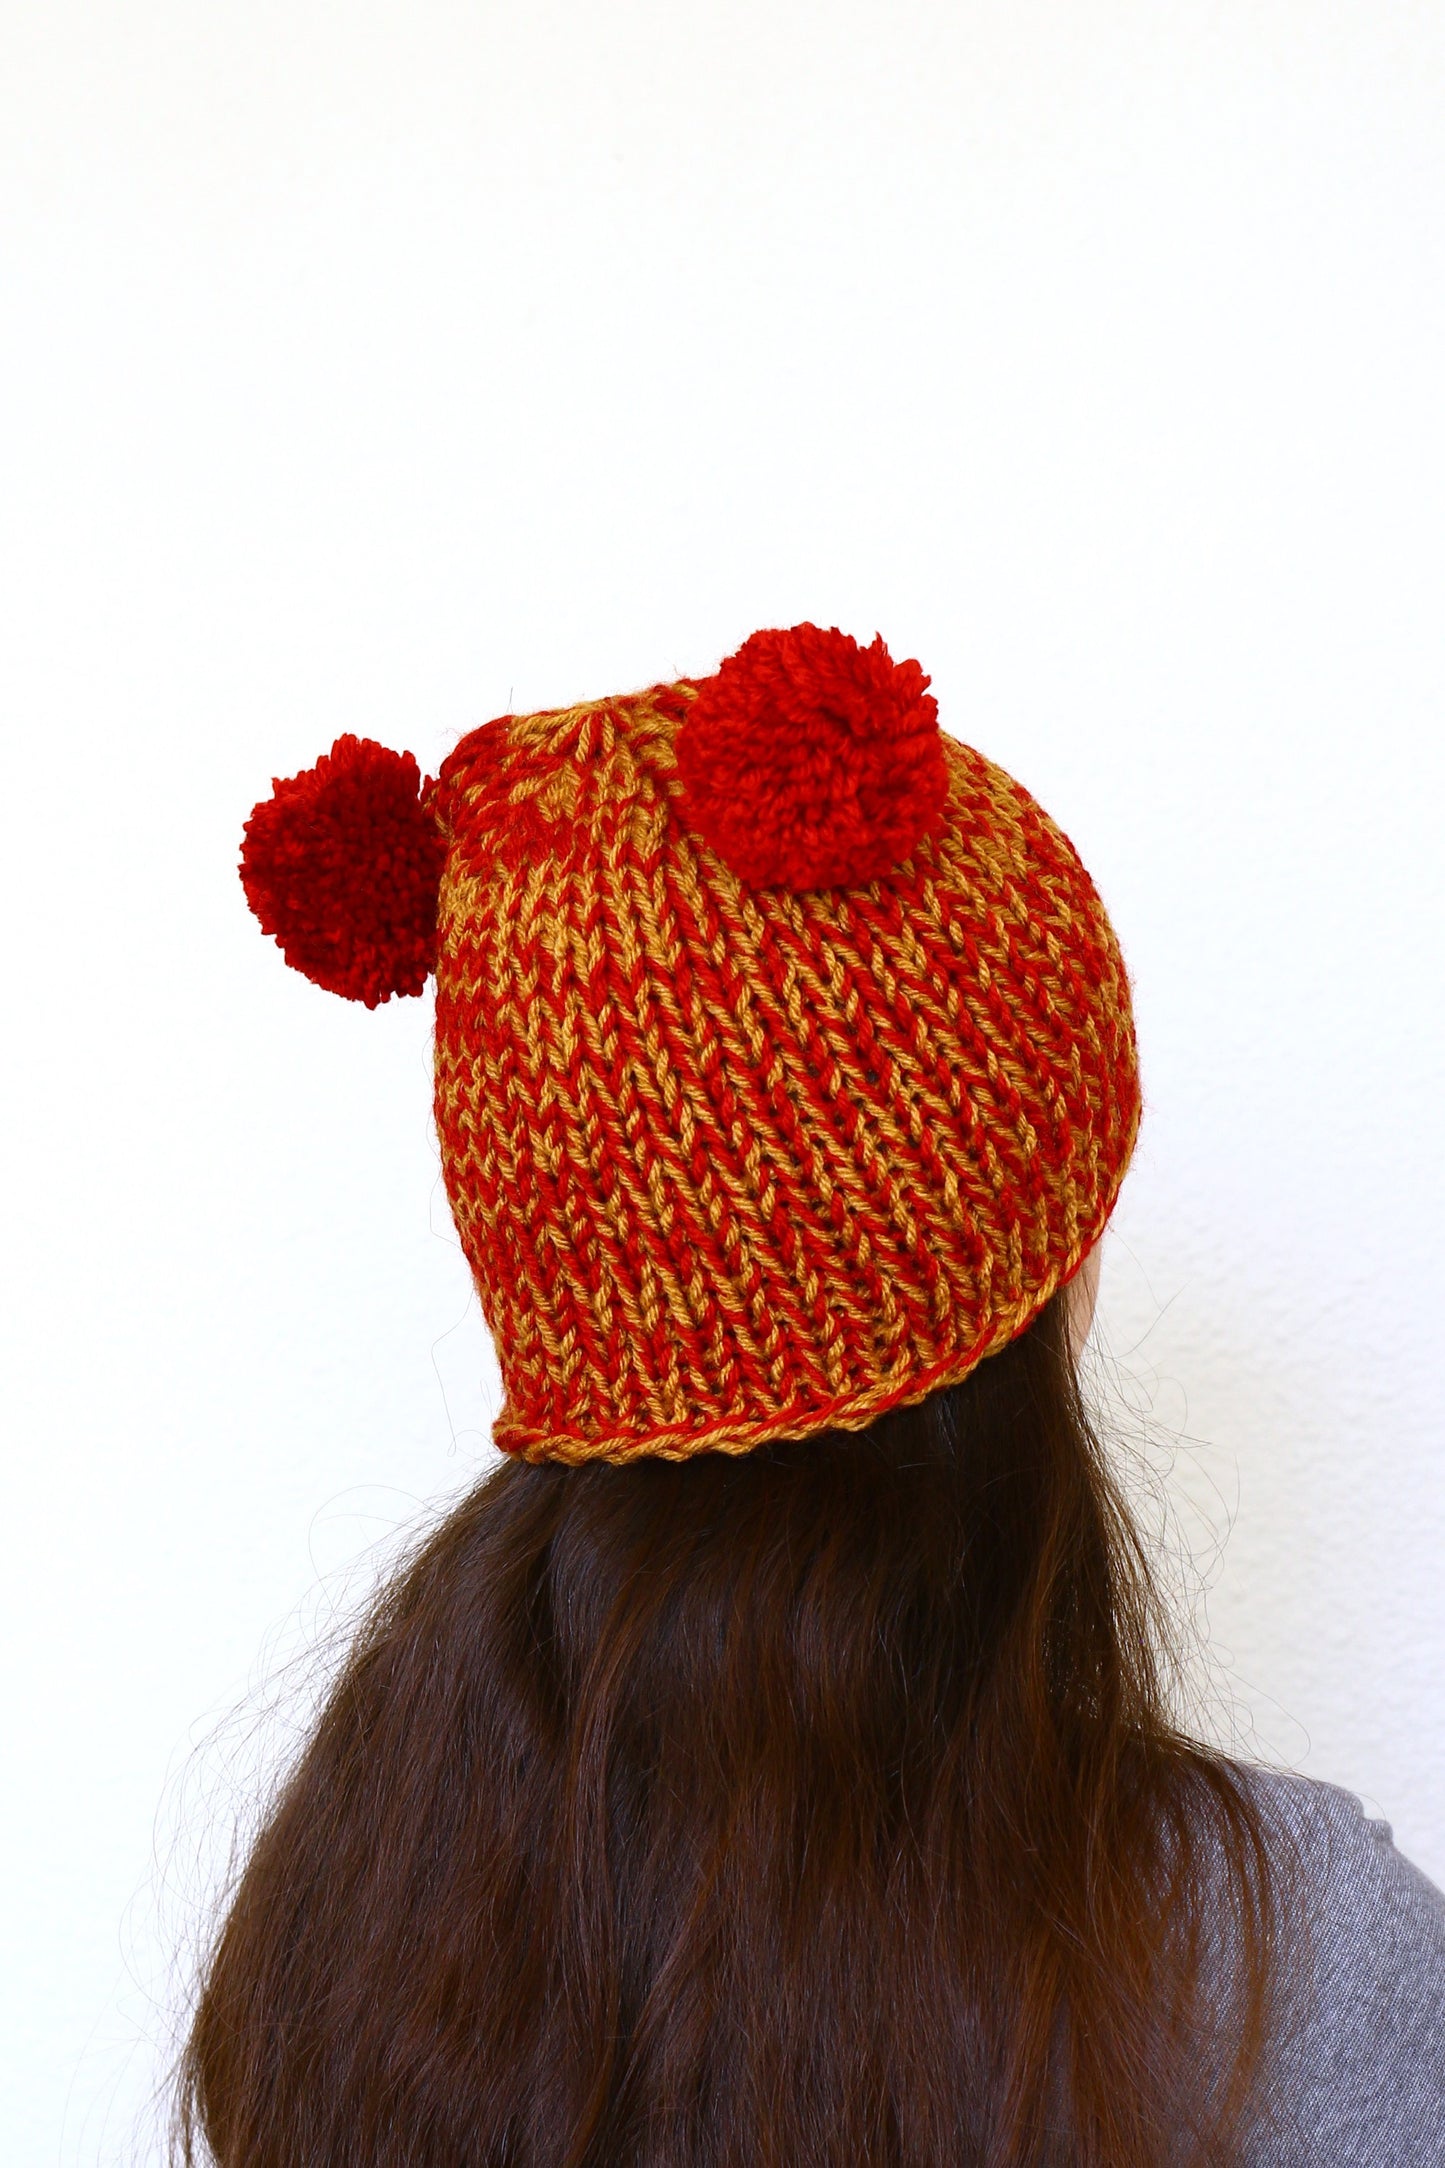 Knit hat with two poms, knit skull hat in red orange color